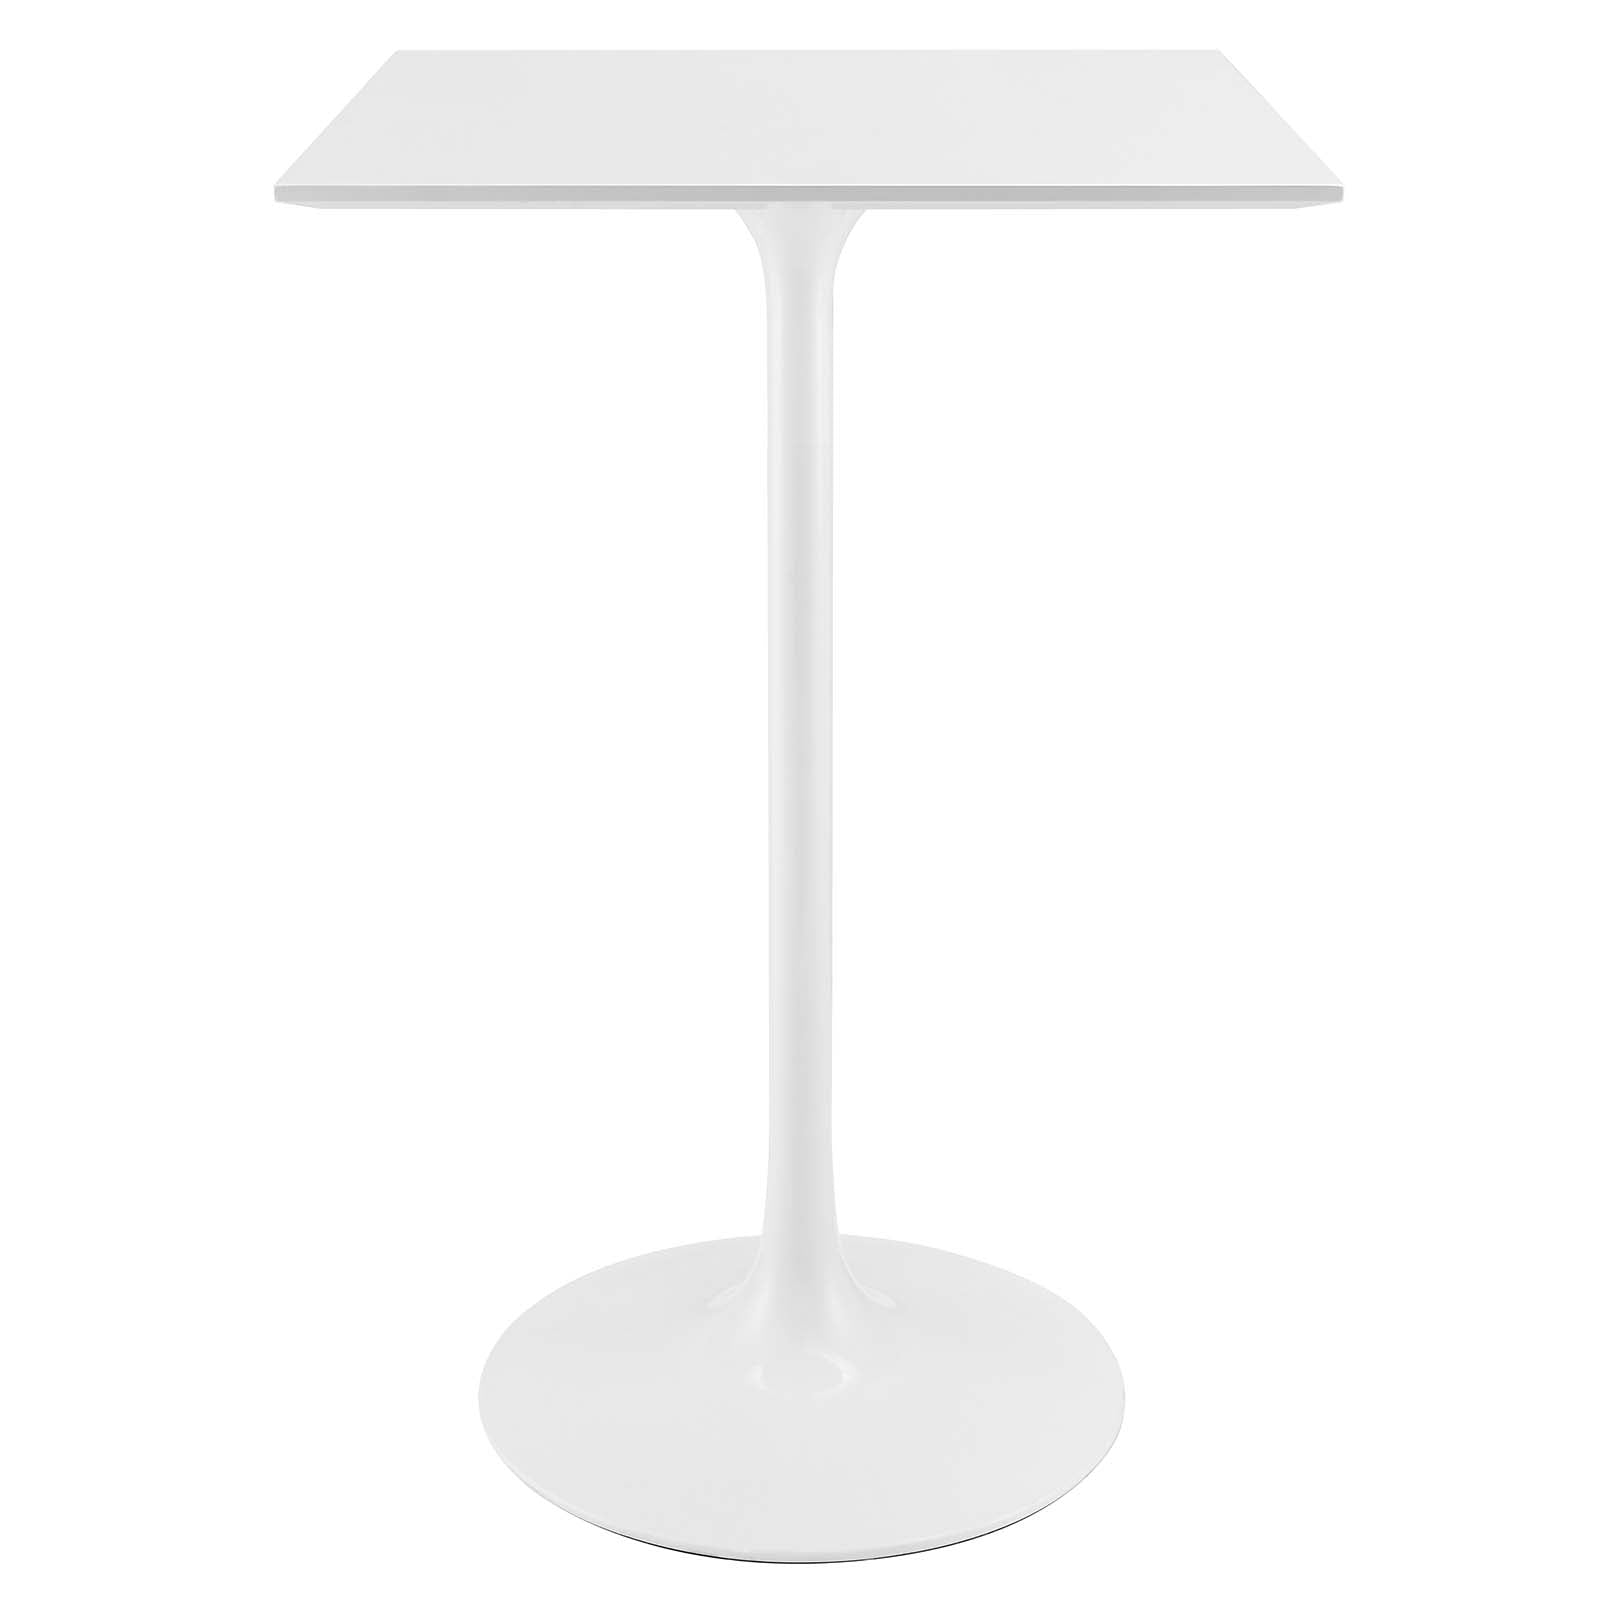 Modway Bar Tables - Lippa 28" Square Wood Top Bar Table White